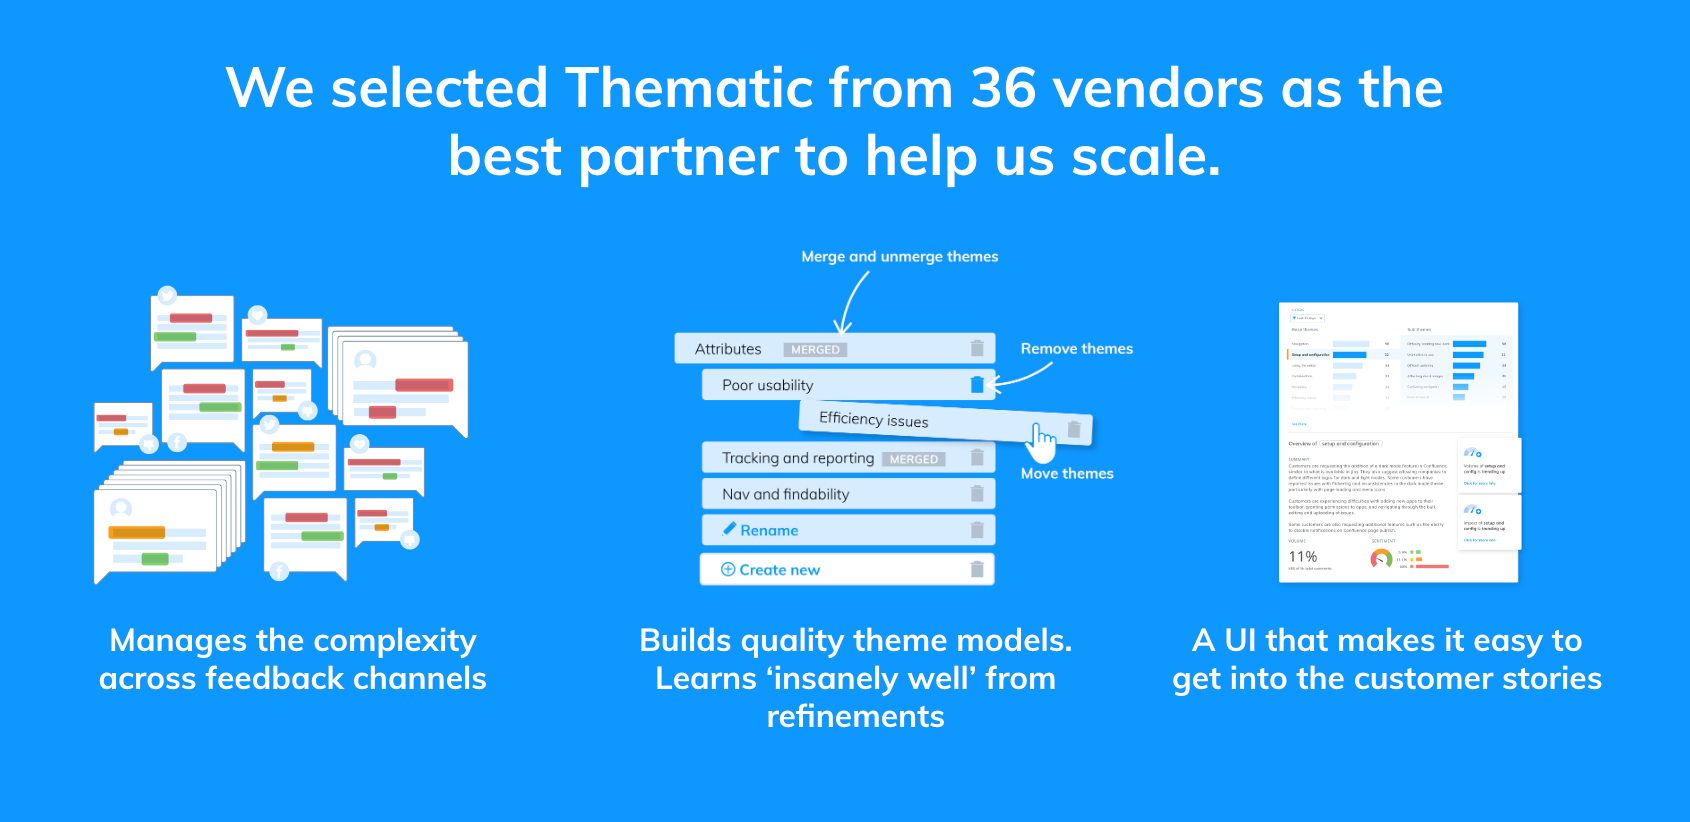 Atlassian selected Thematic from 36 vendors as the best partner to help them scale